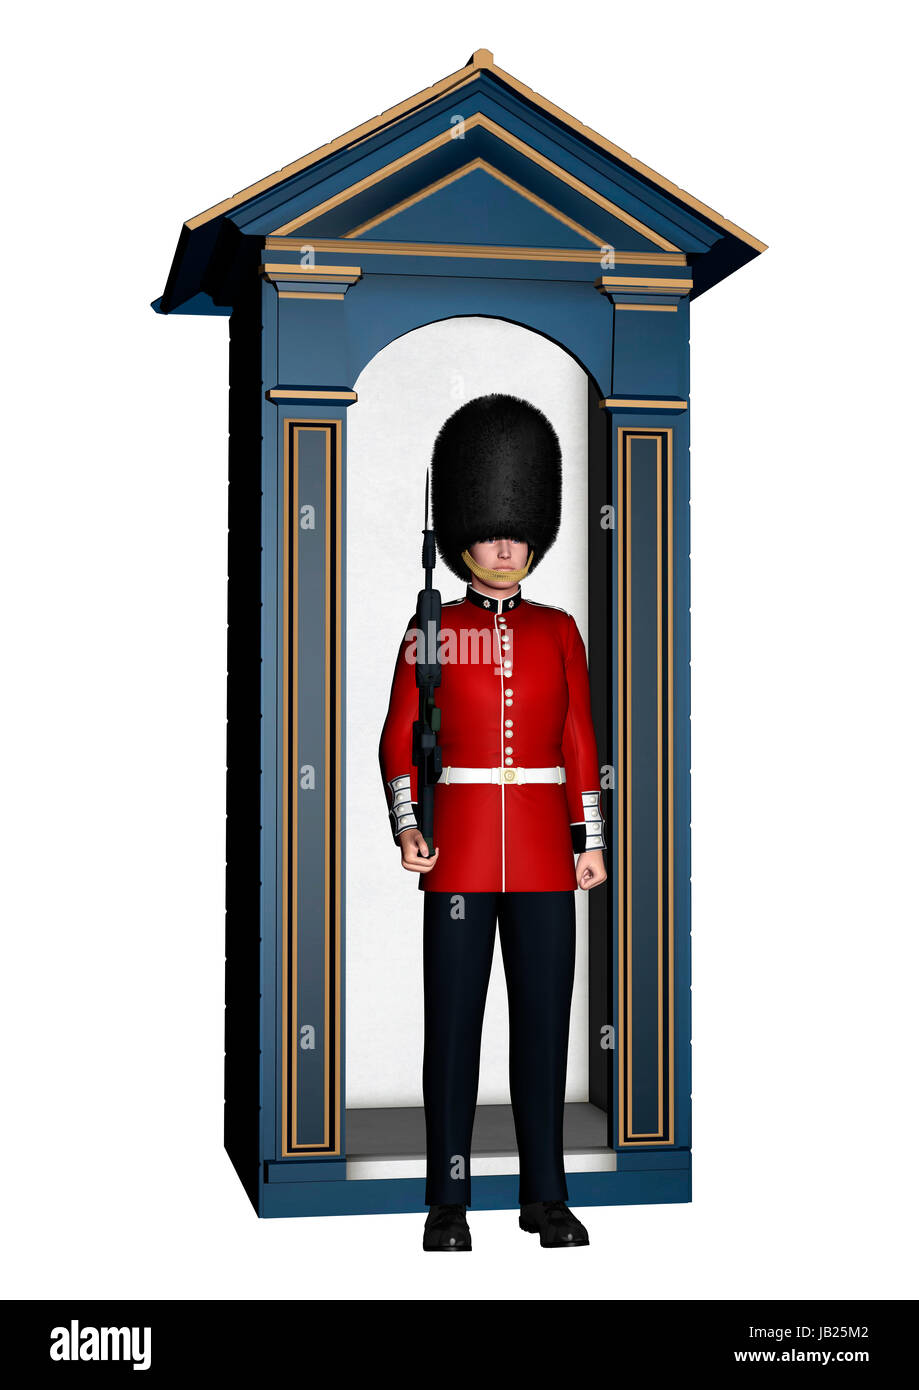 3D digital render of a royal British guardsman holding a rifle and standing near a guard box isolated on white background Stock Photo